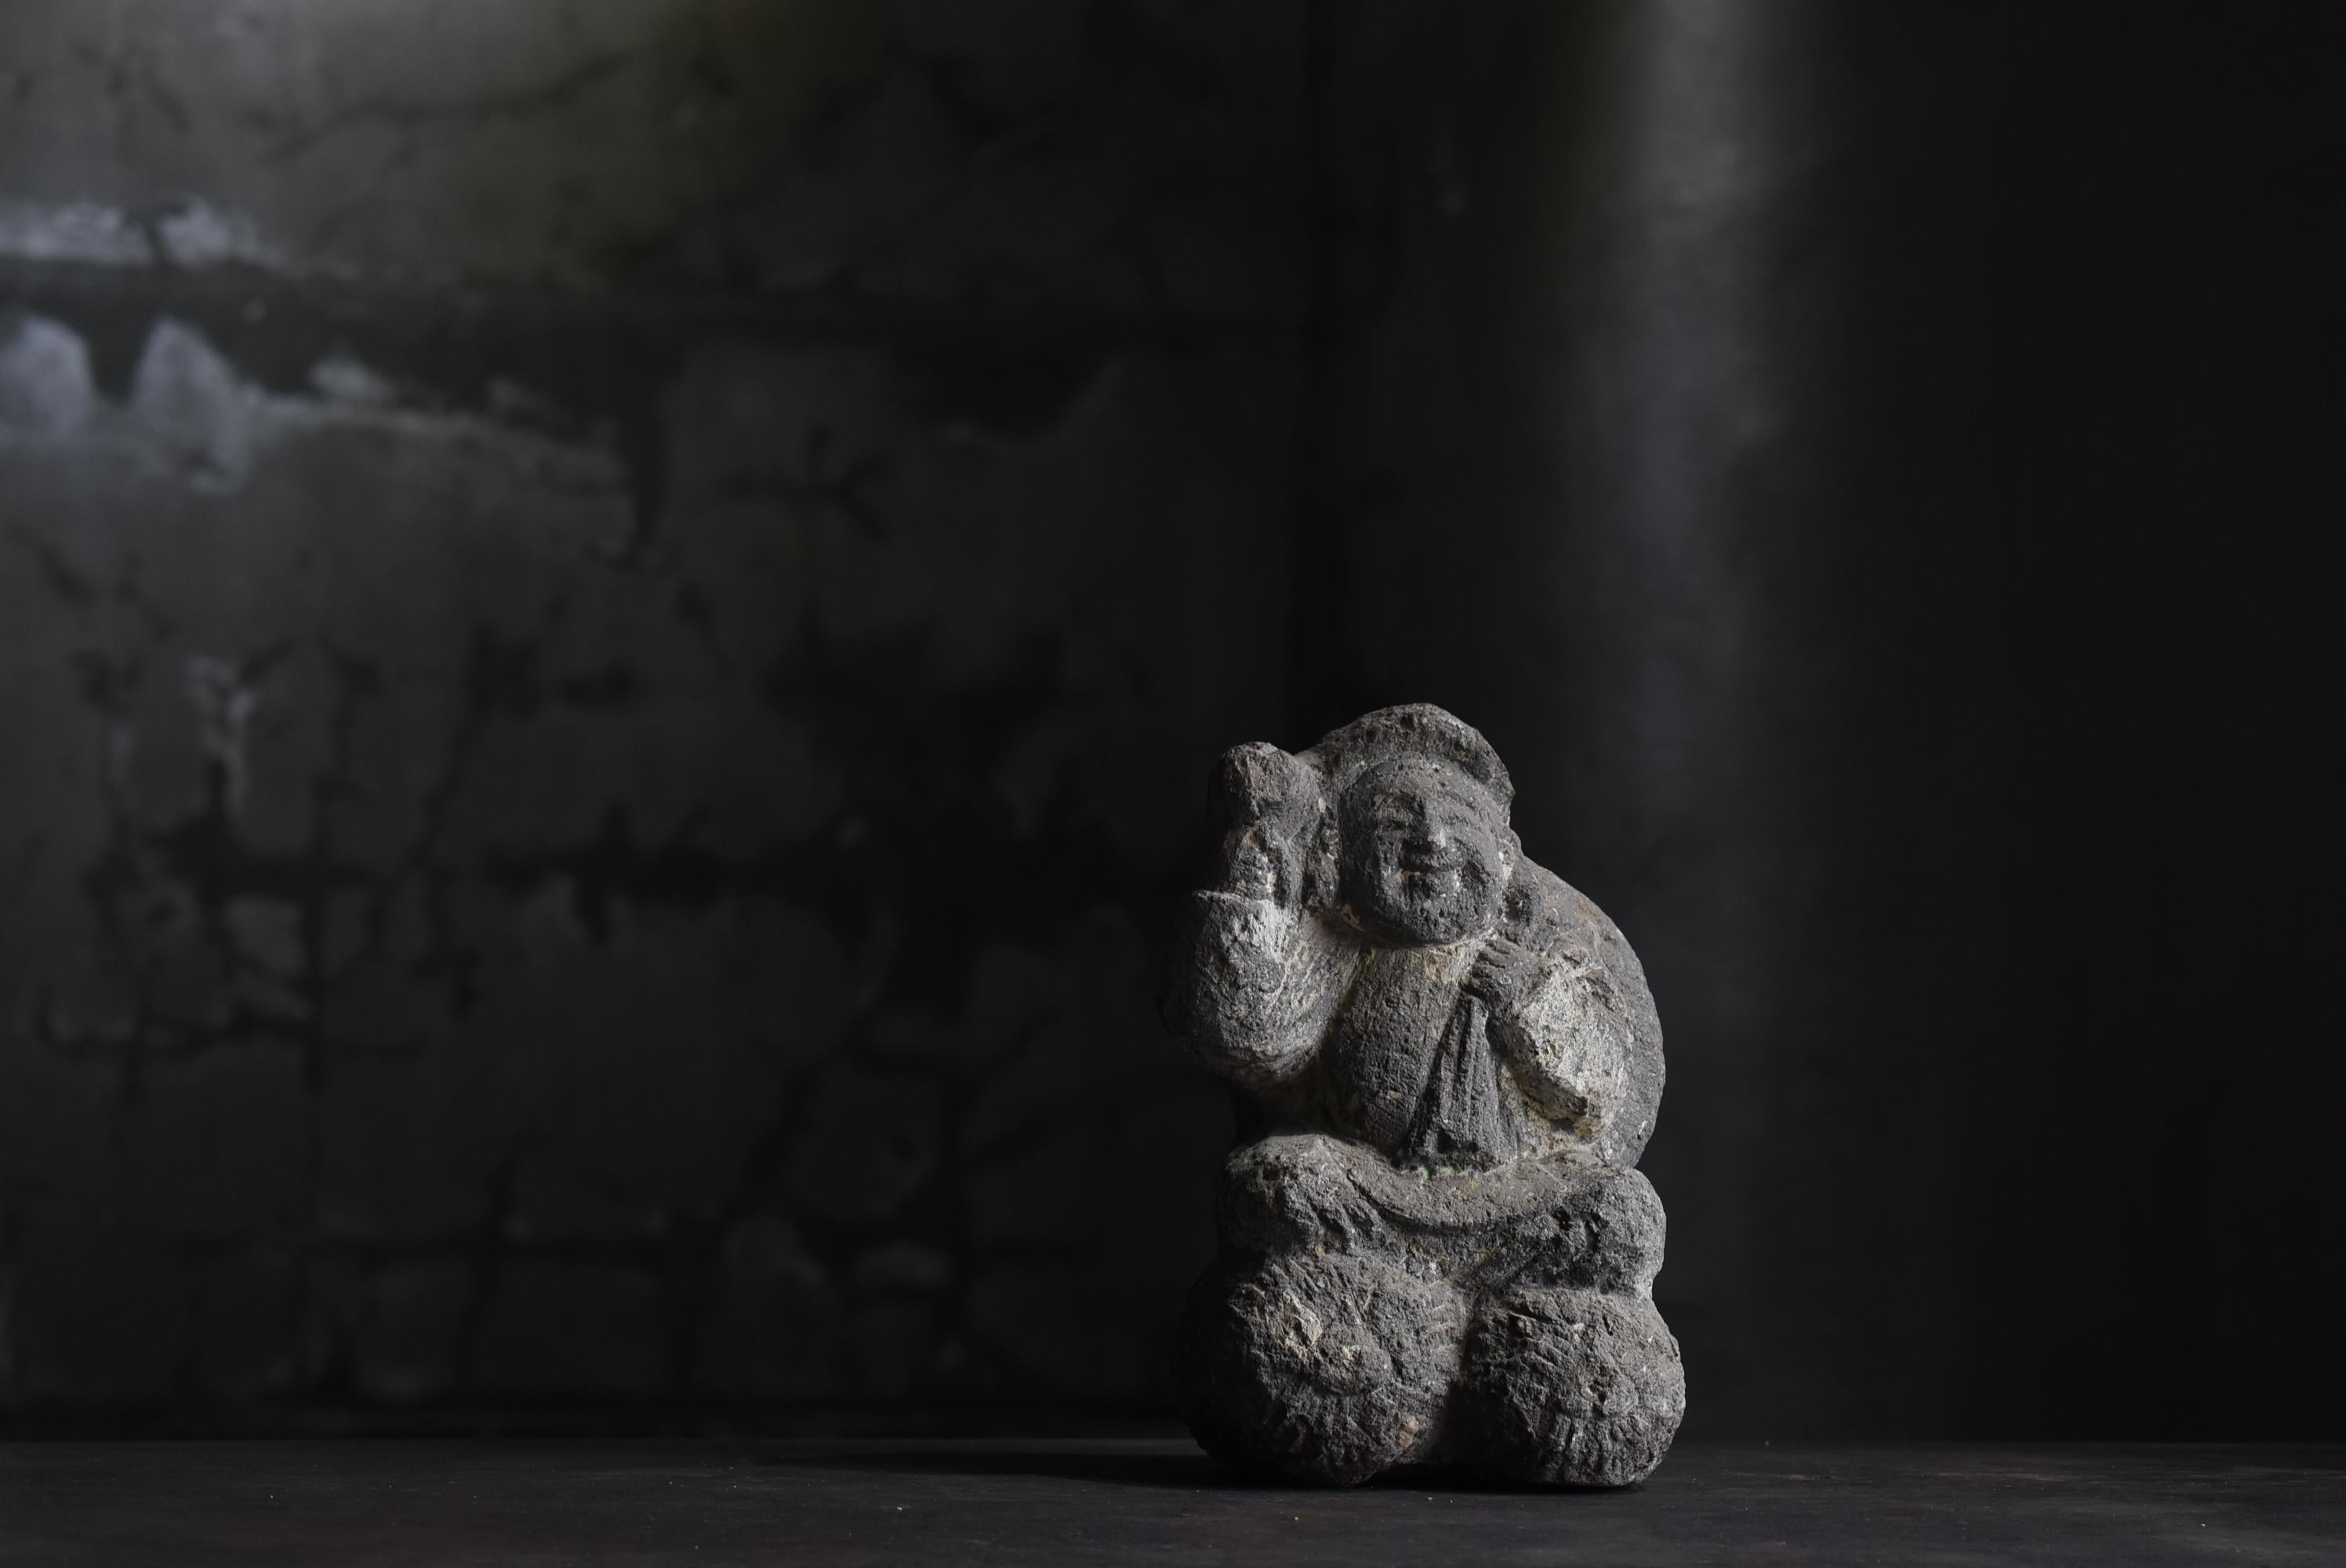 This is a very old Japanese stone statue.
It is from the Meiji era. (1860s-1900s).

This stone statue is called 